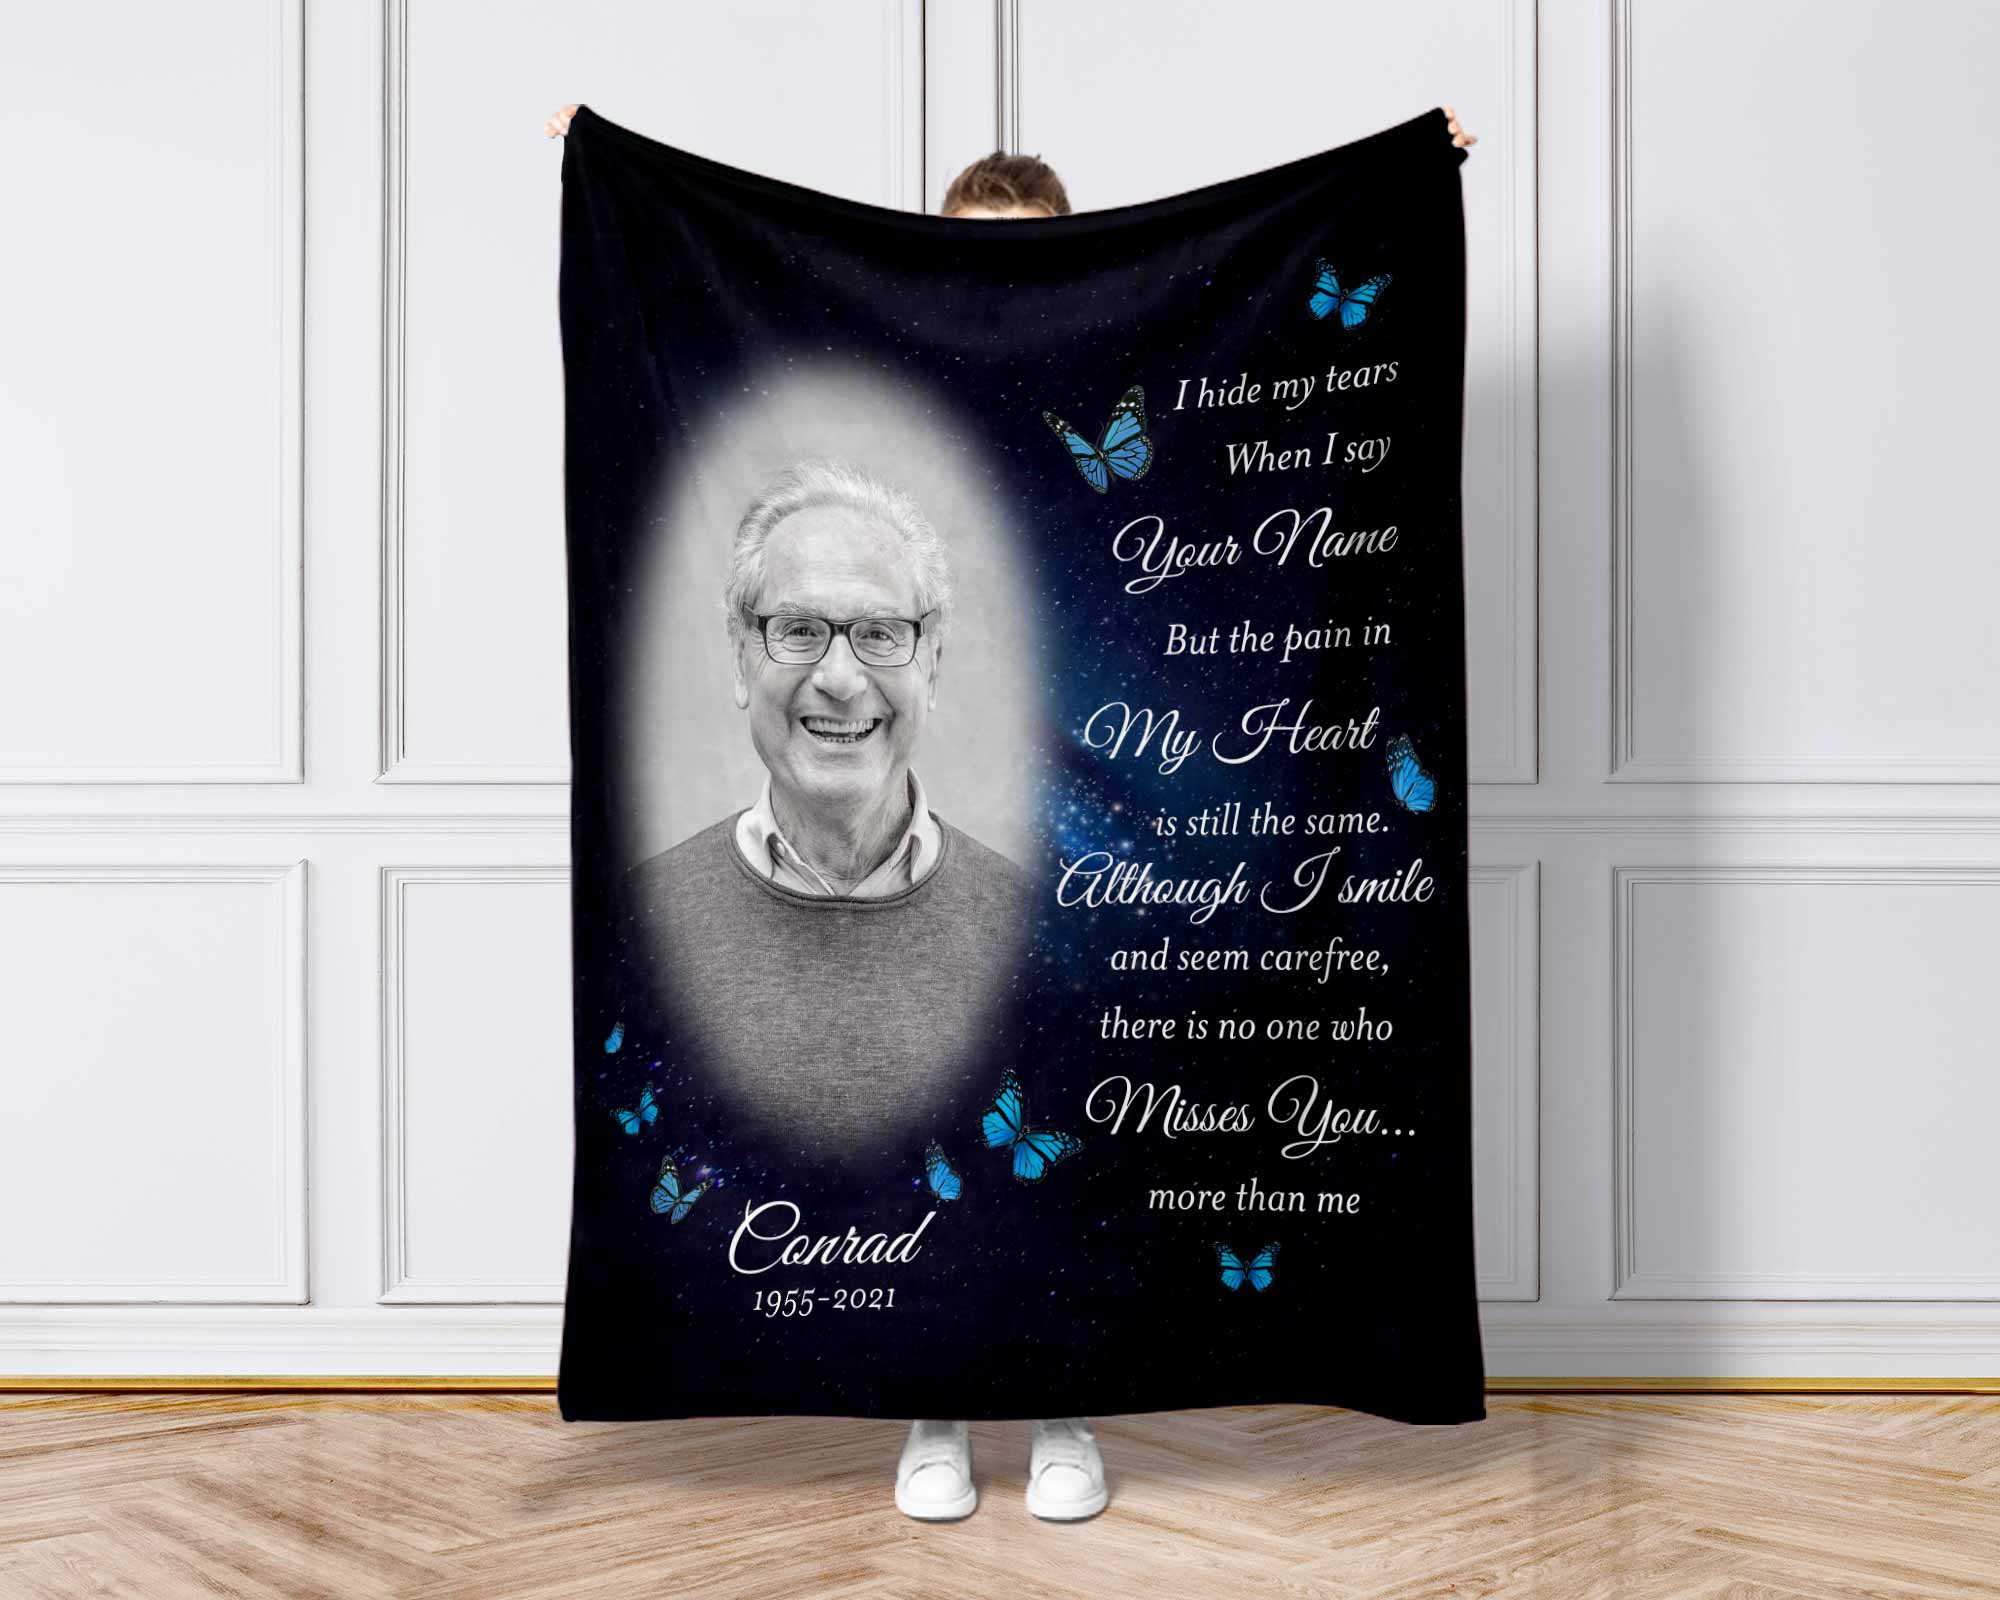 Personalized Memorial Blankets With Photo, Sympathy Blankets Fathers Day Gift, I Hide My Tears Custom Photo Blanket